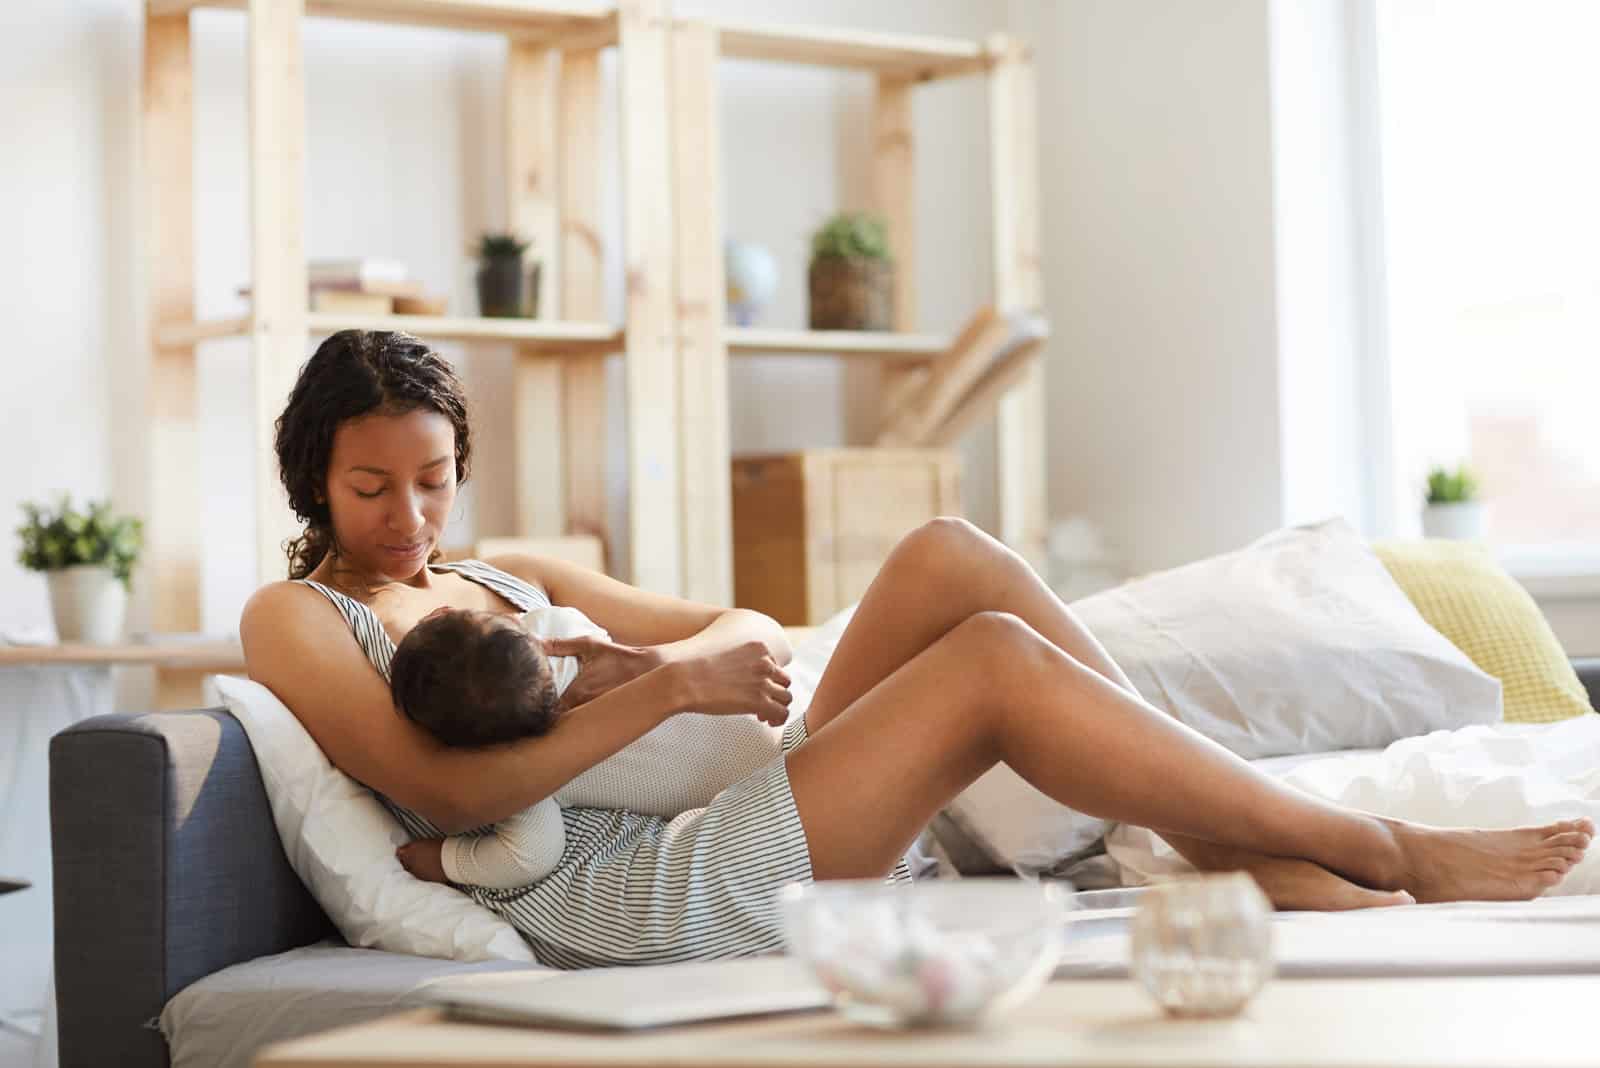 the woman lies on the couch and breastfeeds the child